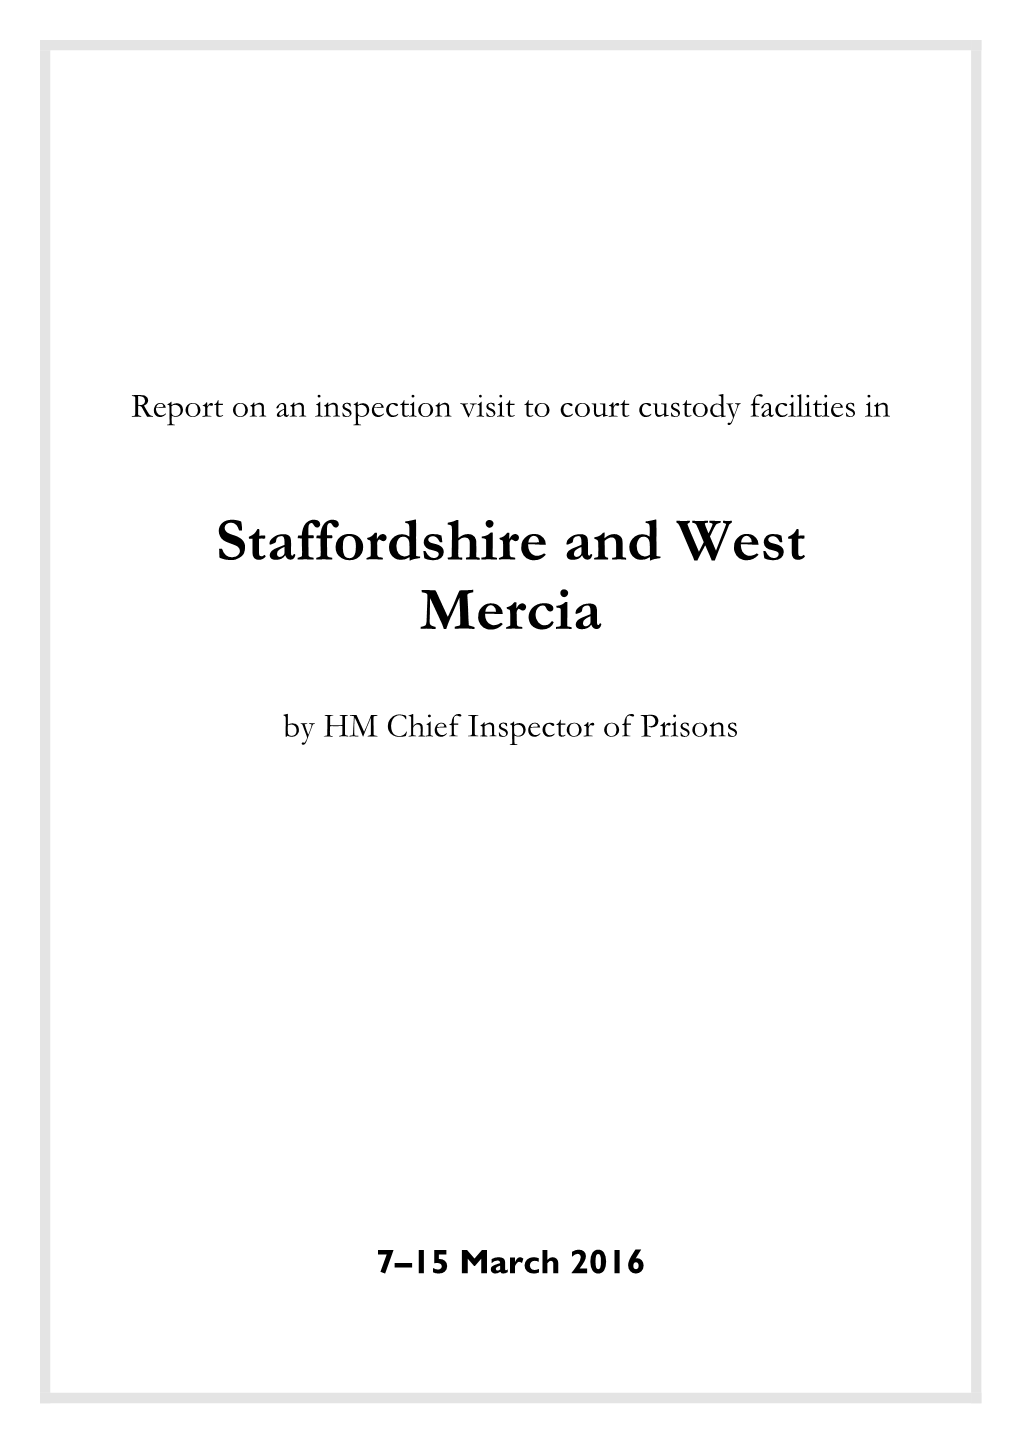 Staffordshire and West Mercia